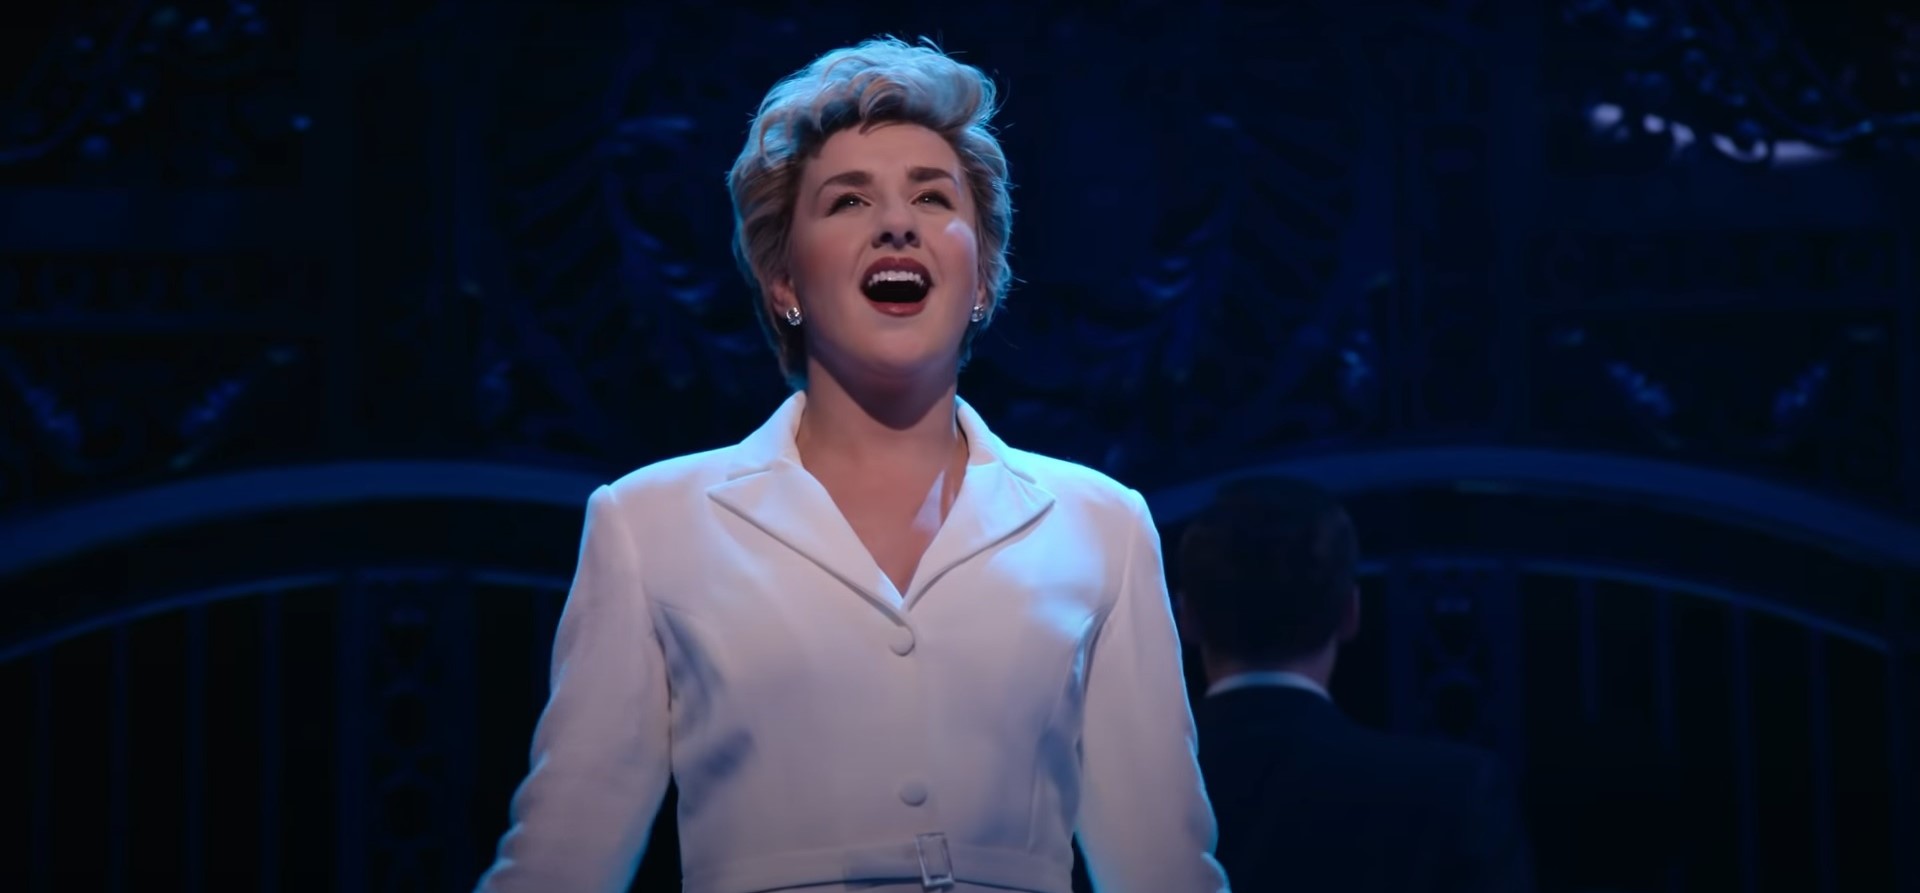 Is Diana: The Musical Based on a True Story?